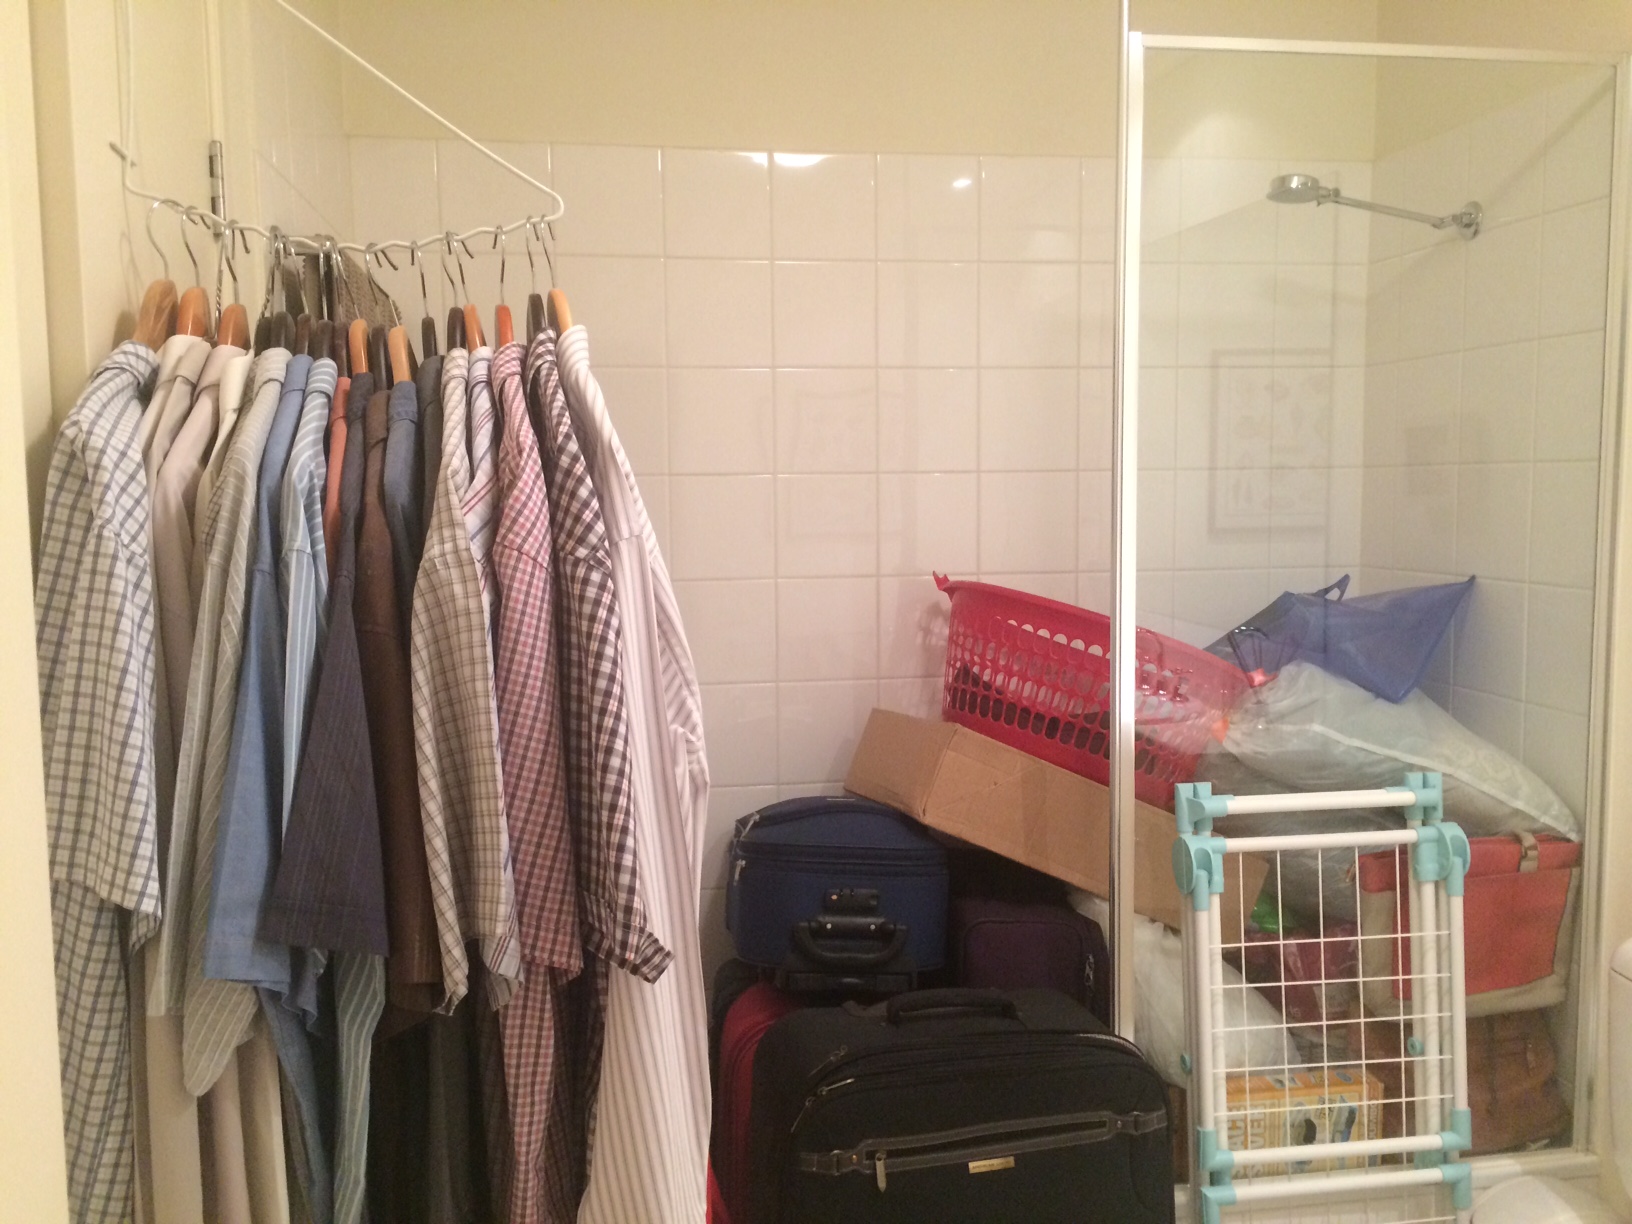 I decluttered my wardrobe into the bathroom!